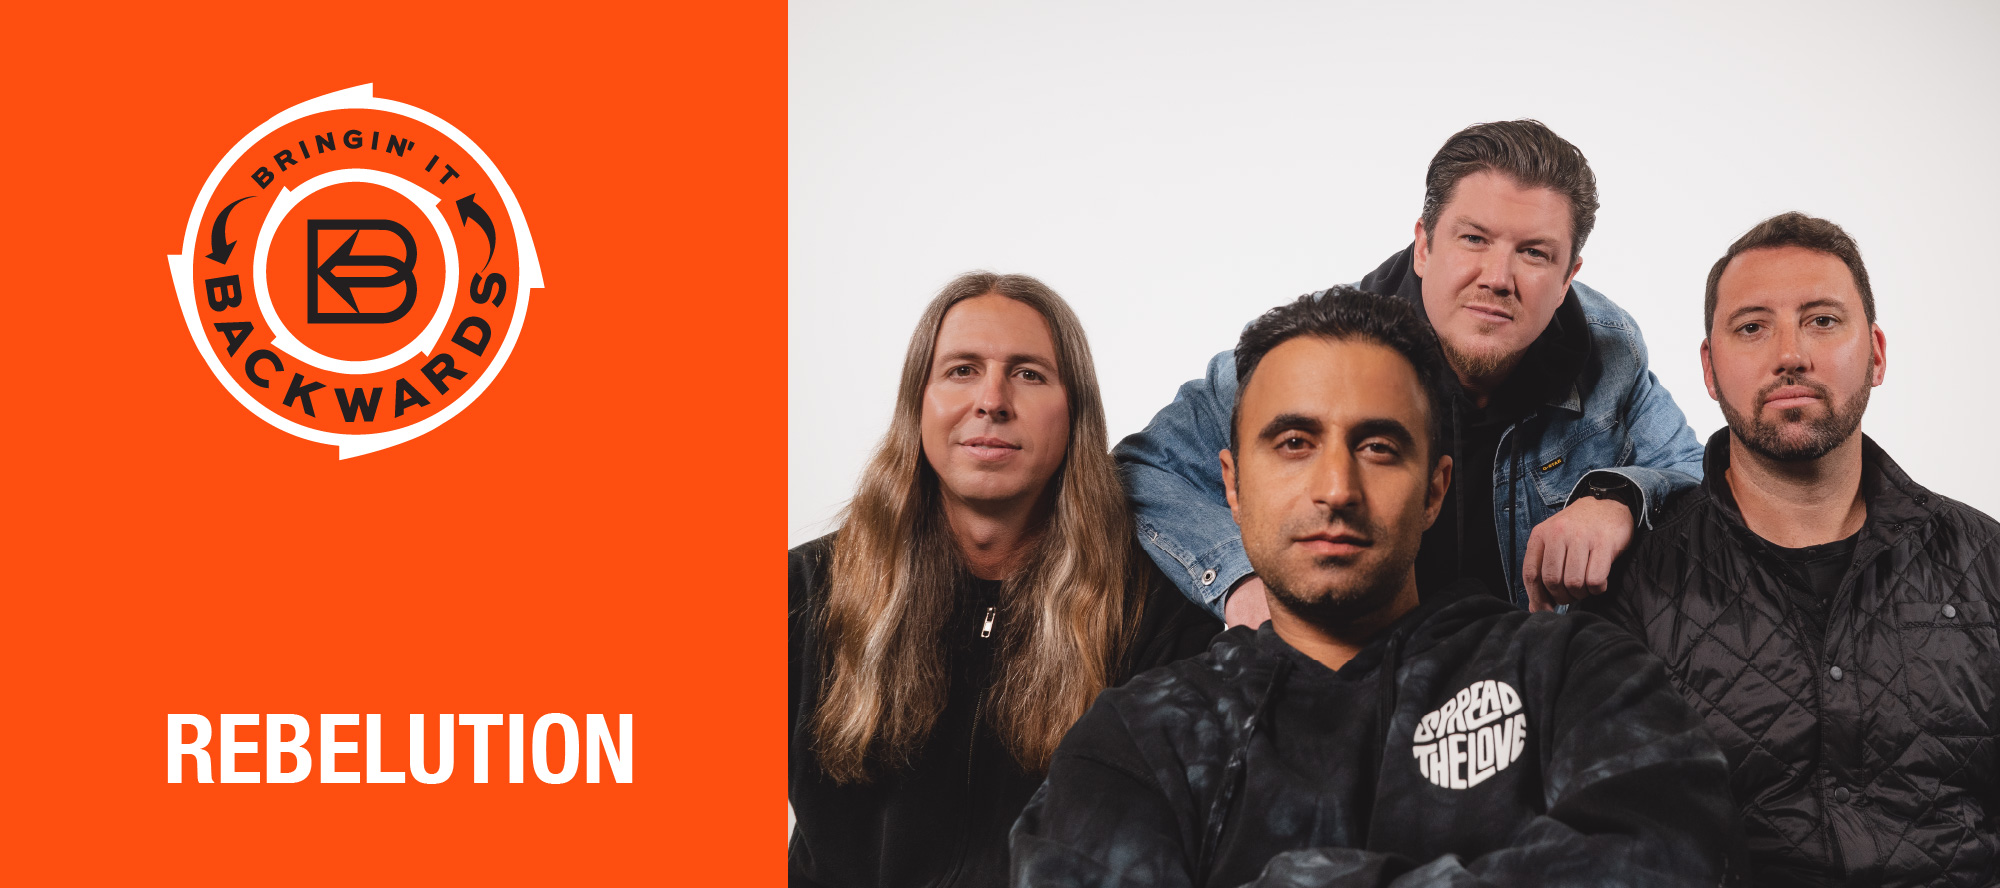 Bringin’ it Backwards: Interview with Rebelution